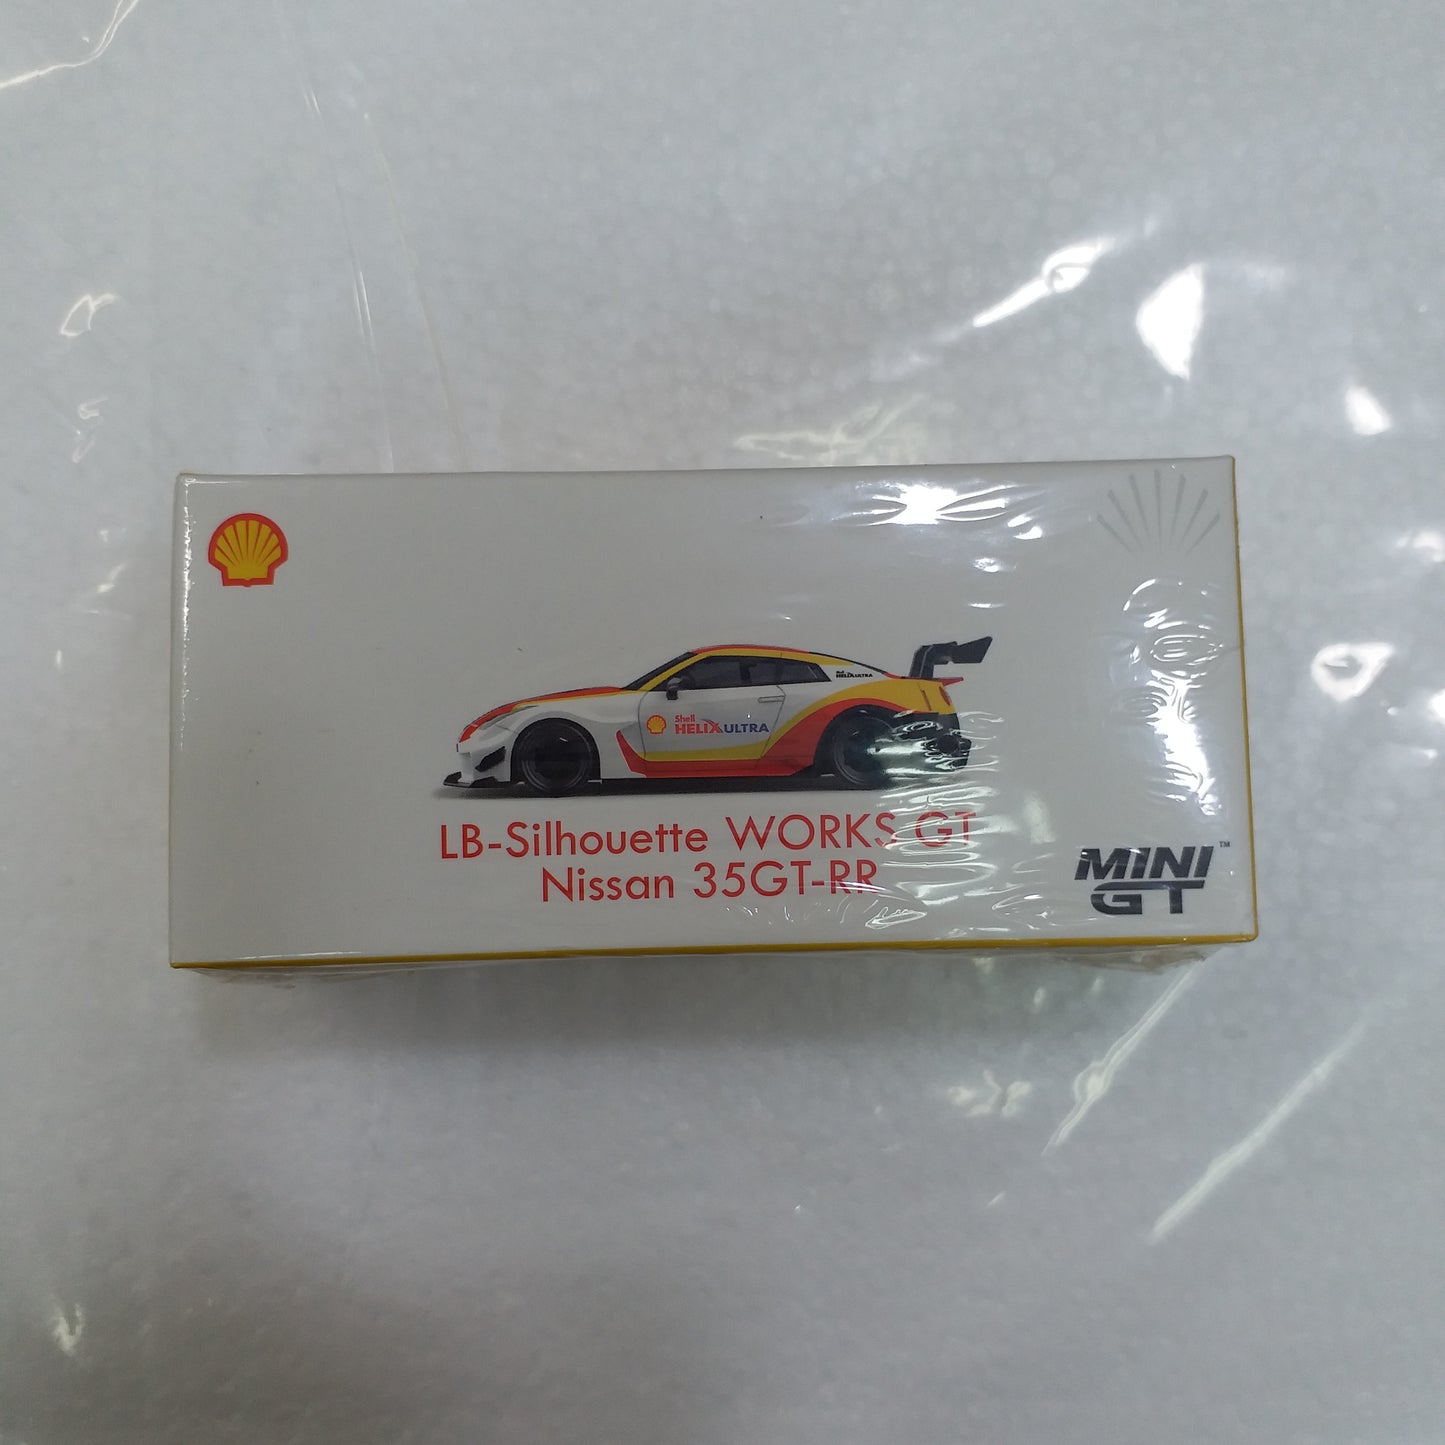 Mini GT x shell Exclusive #262 LB-Silhouette WORKS GT Nissan 35GT-RR V.2